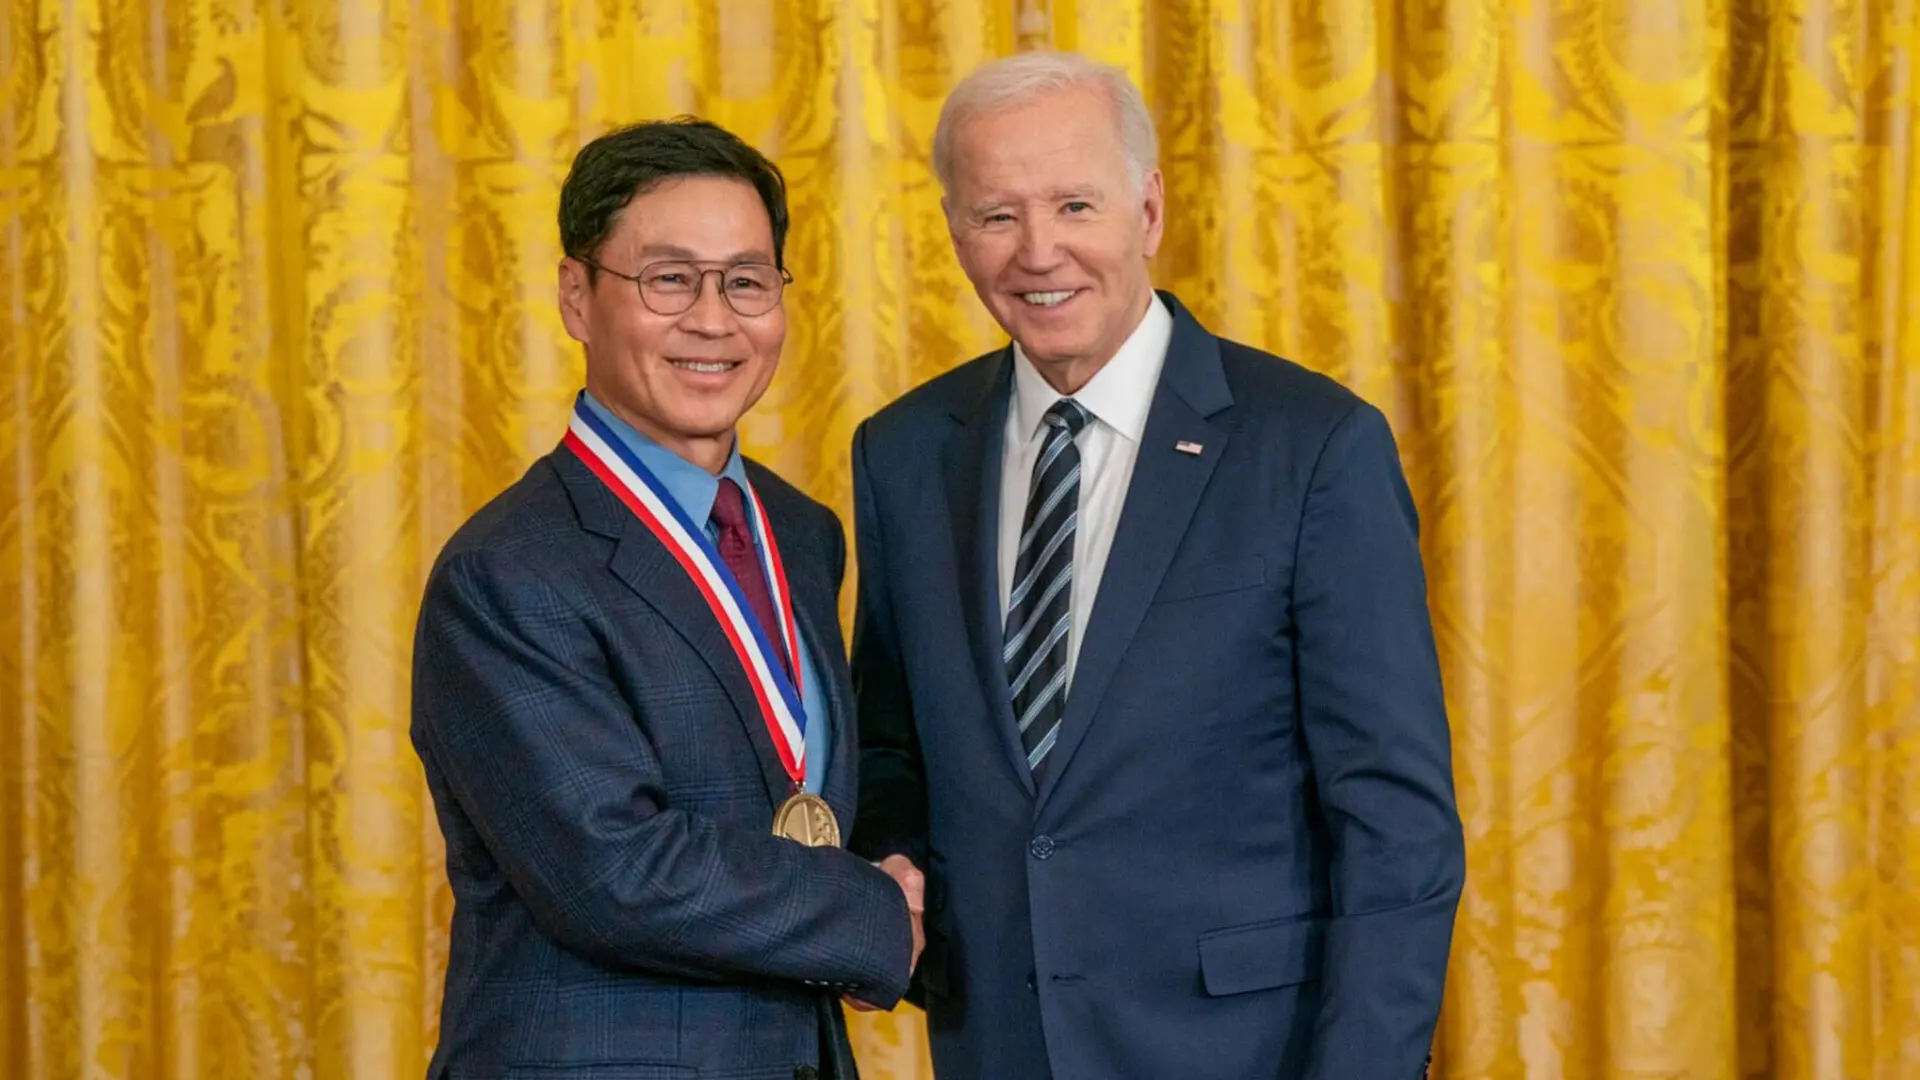 Jeong Kim Awarded National Medal of Technology and Innovation